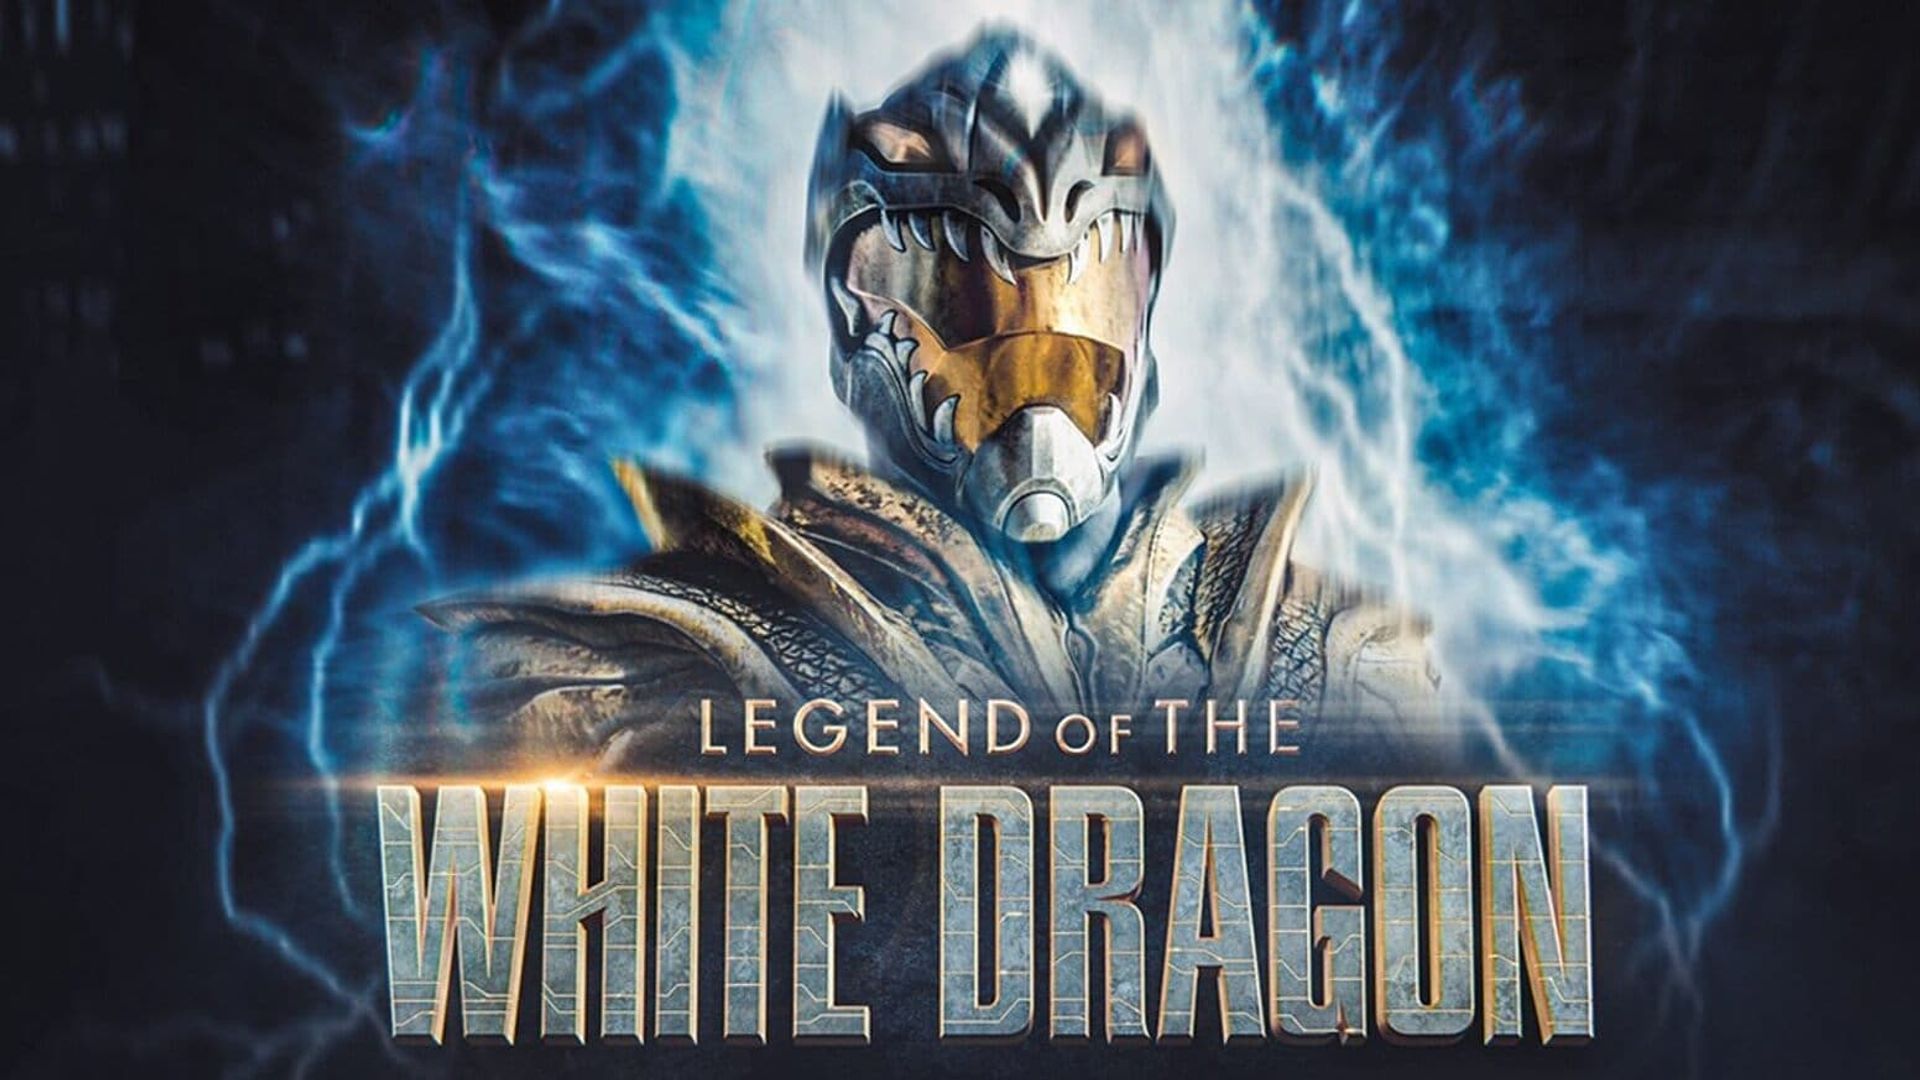 Legend of the White Dragon background